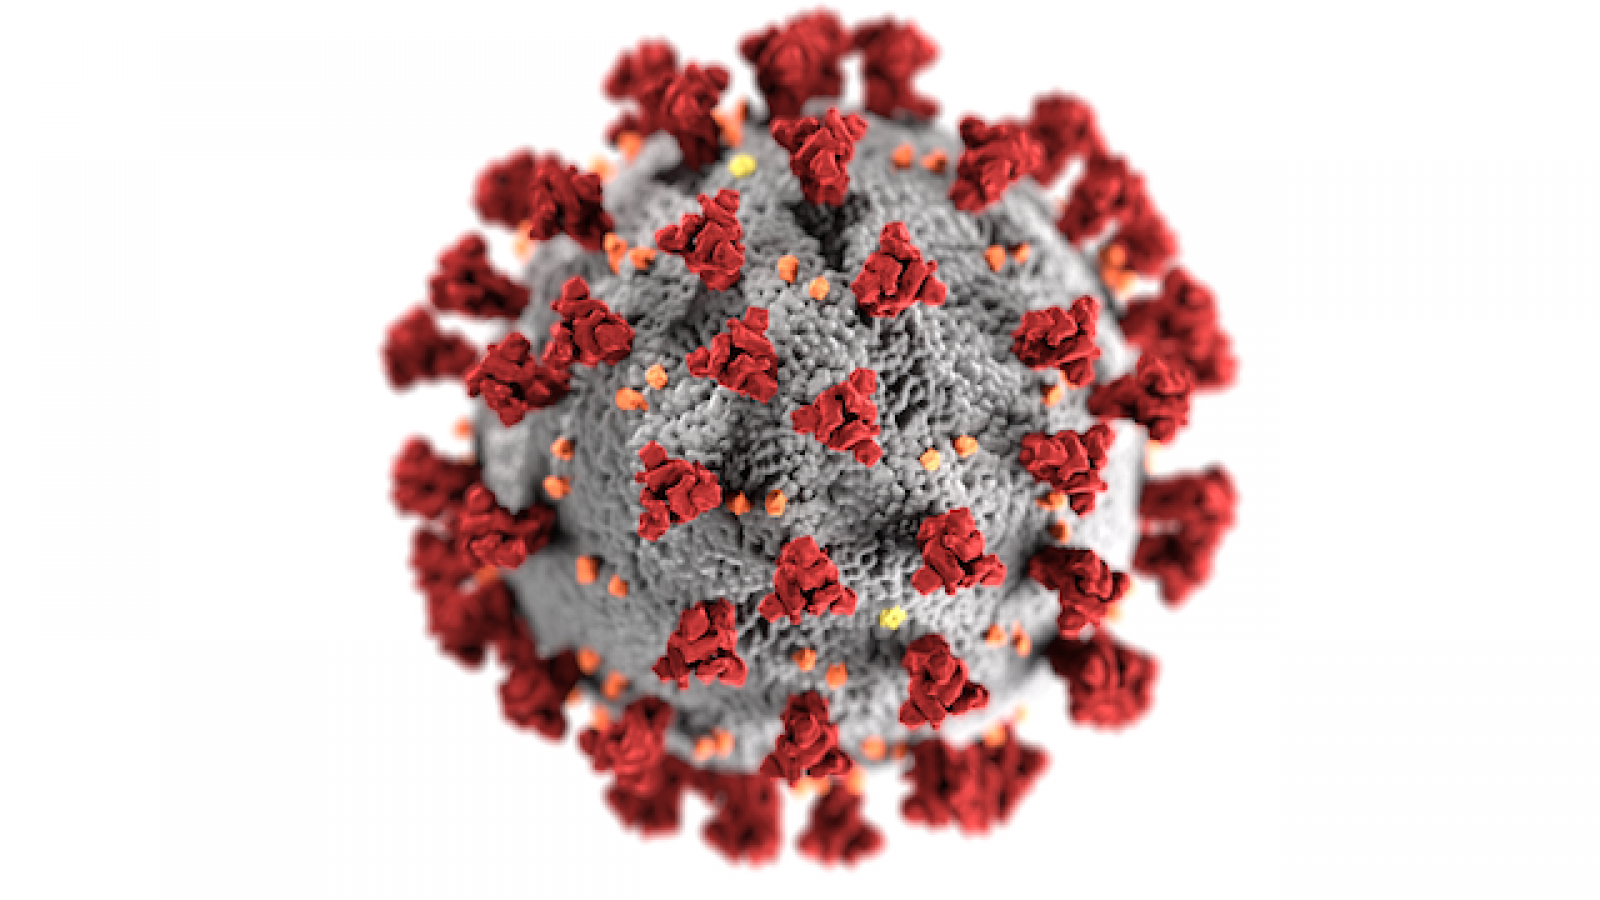 a visualization of the coronavirus, which looks like a round sphere with bristly red patches all over it